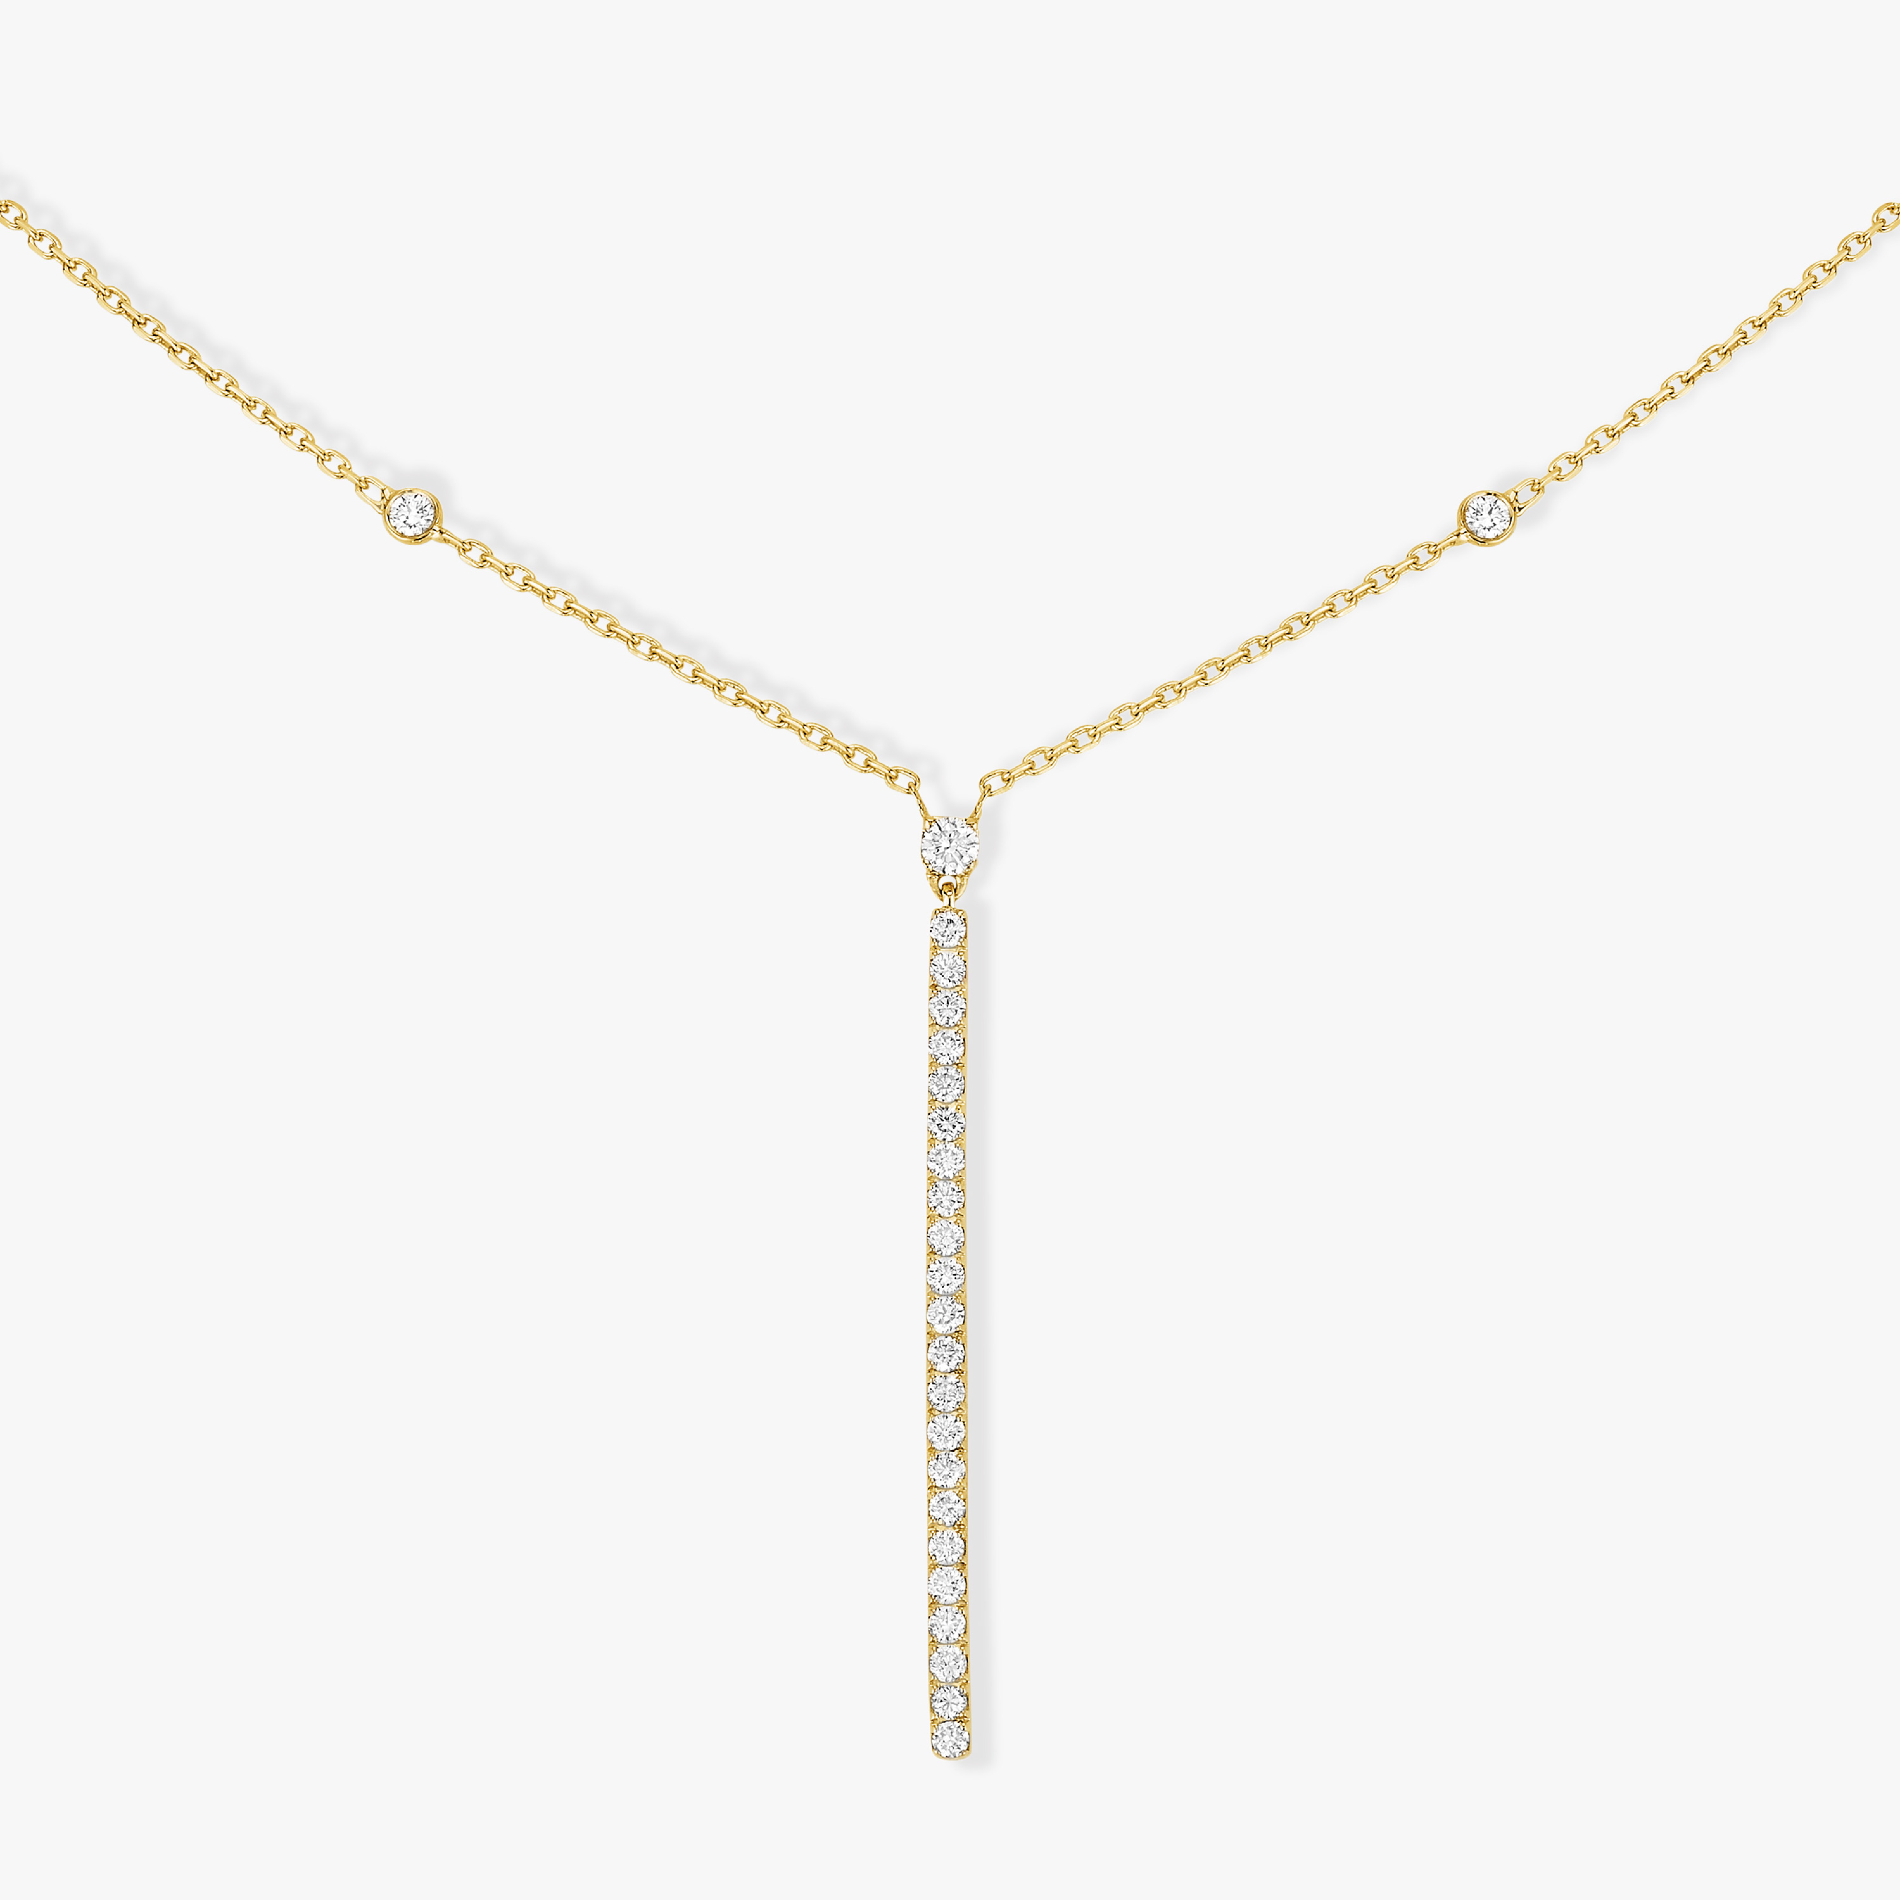 Gatsby Vertical Bar Yellow Gold For Her Diamond Necklace 05448-YG